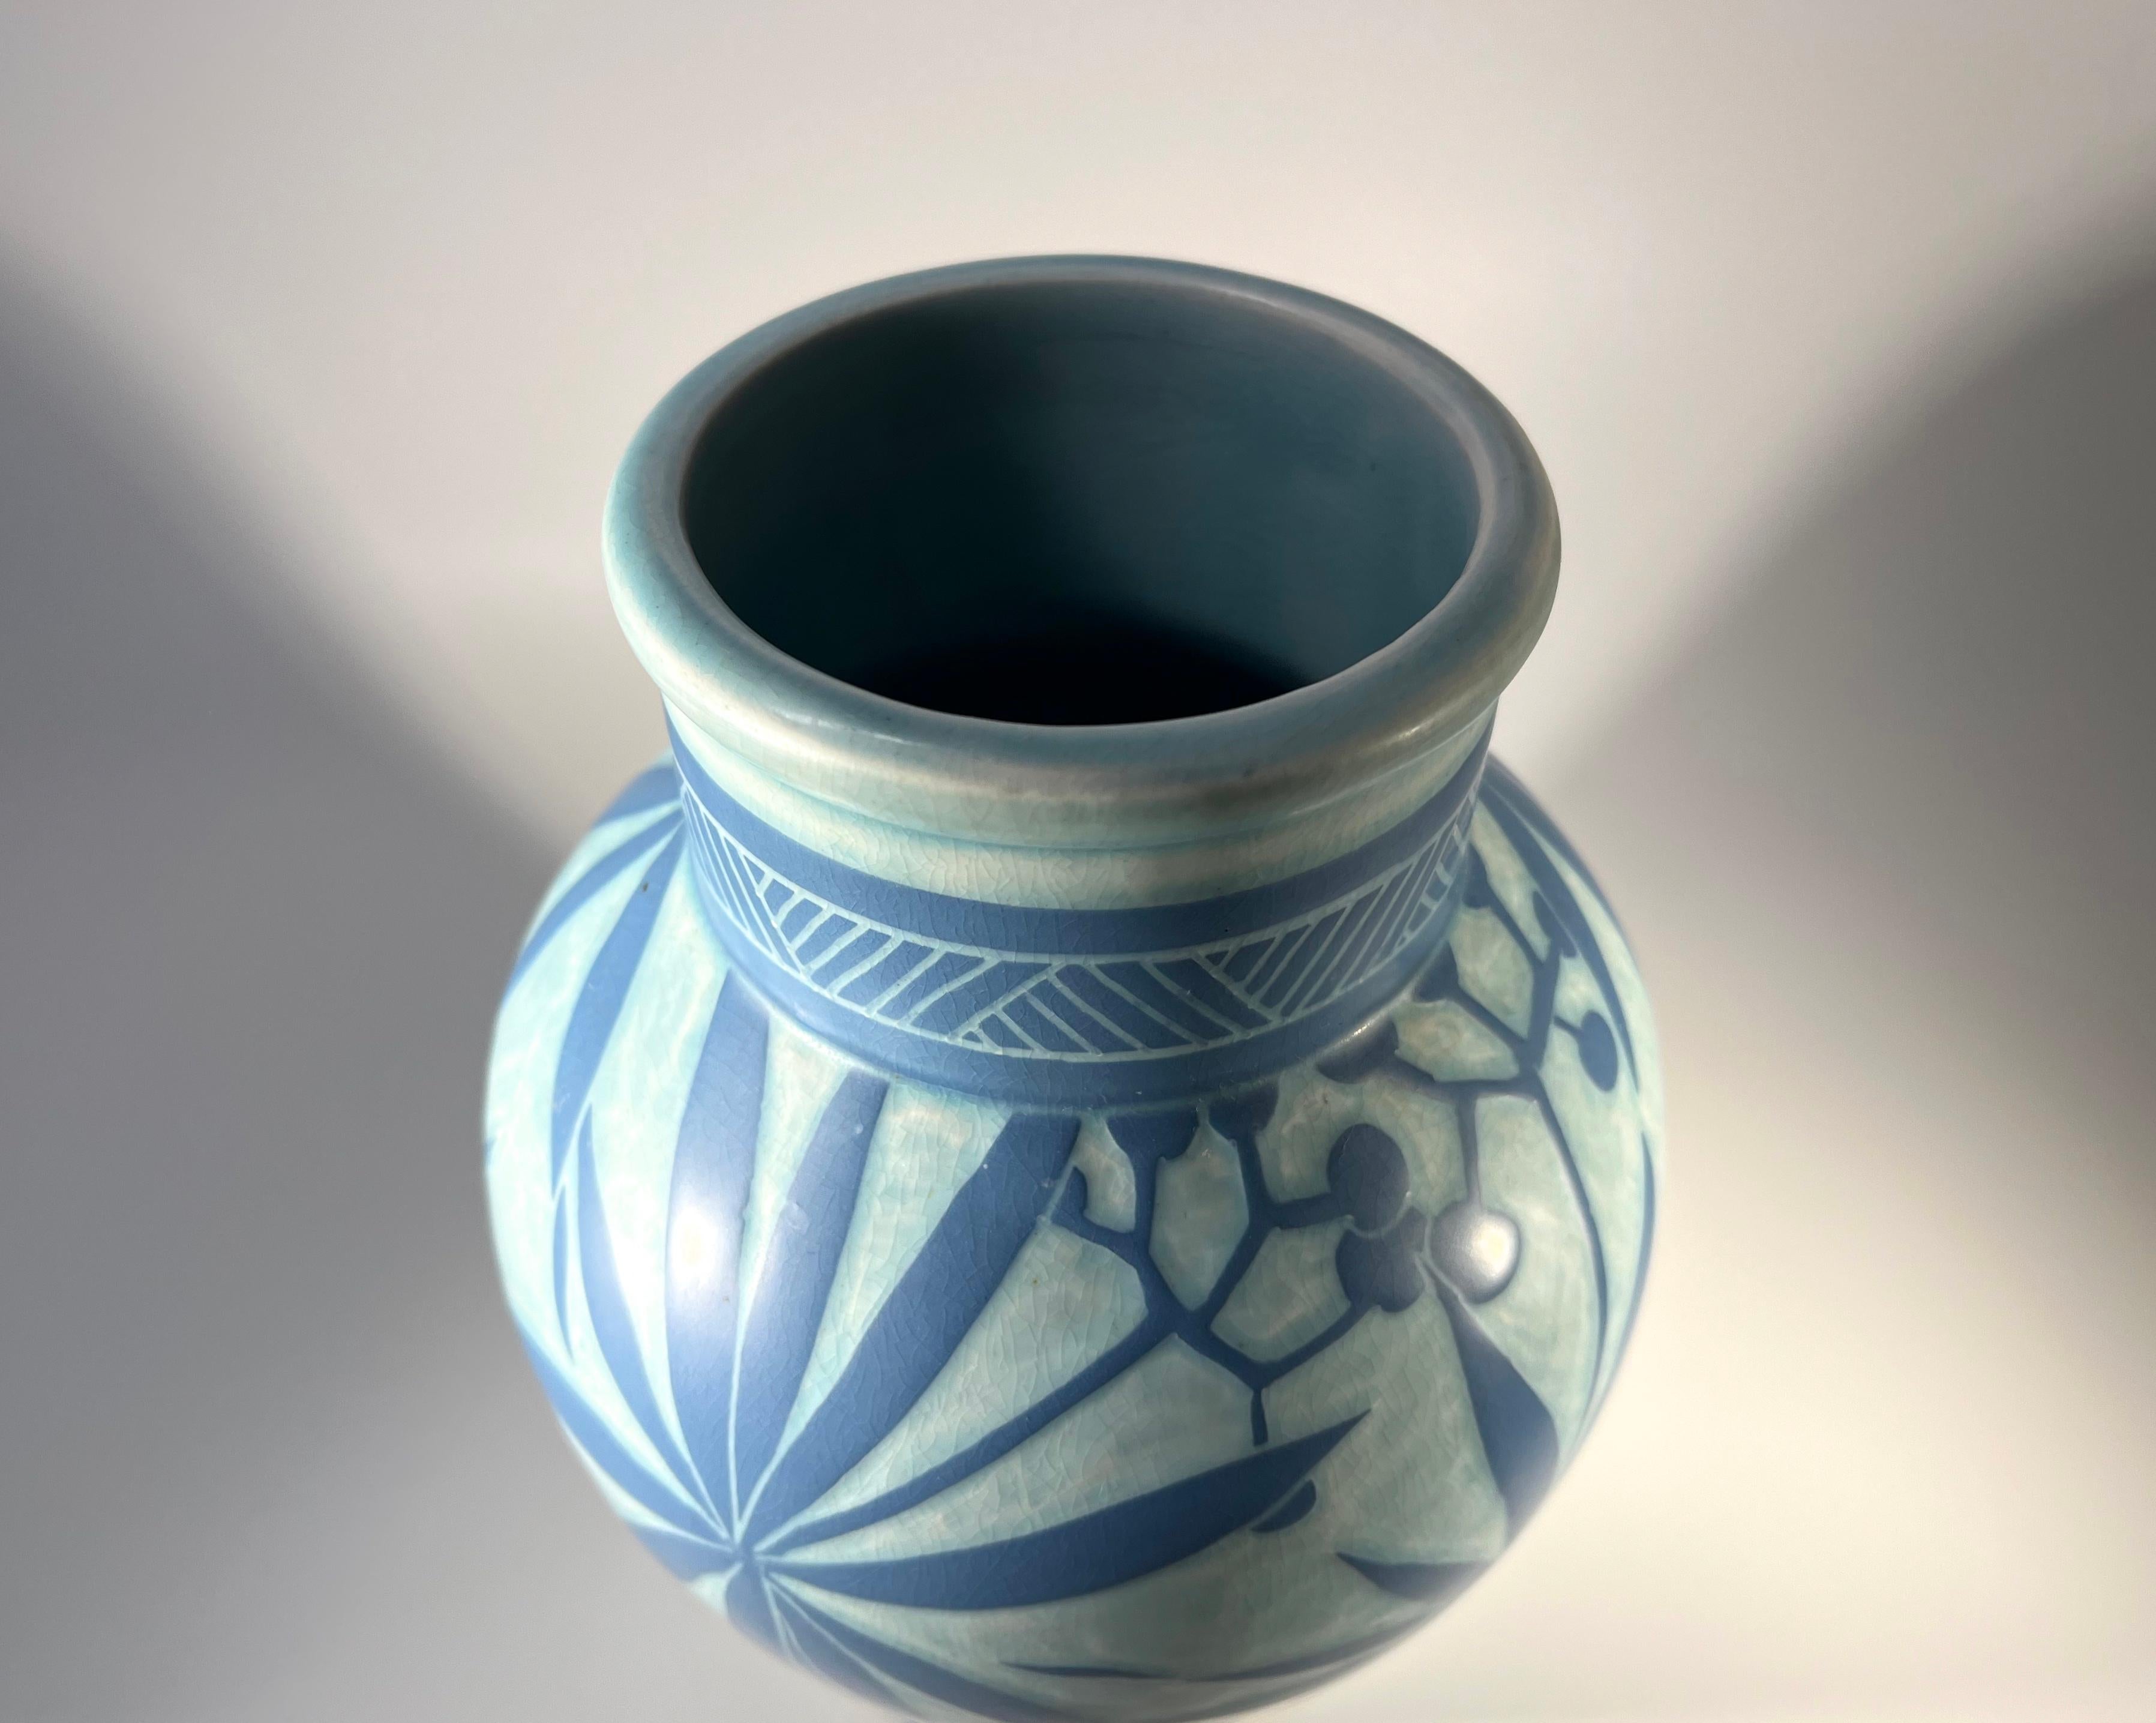 Josef Ekberg For Gustavsberg Of Sweden, Stylised Sgraffito Palm Vase c1911 In Good Condition For Sale In Rothley, Leicestershire